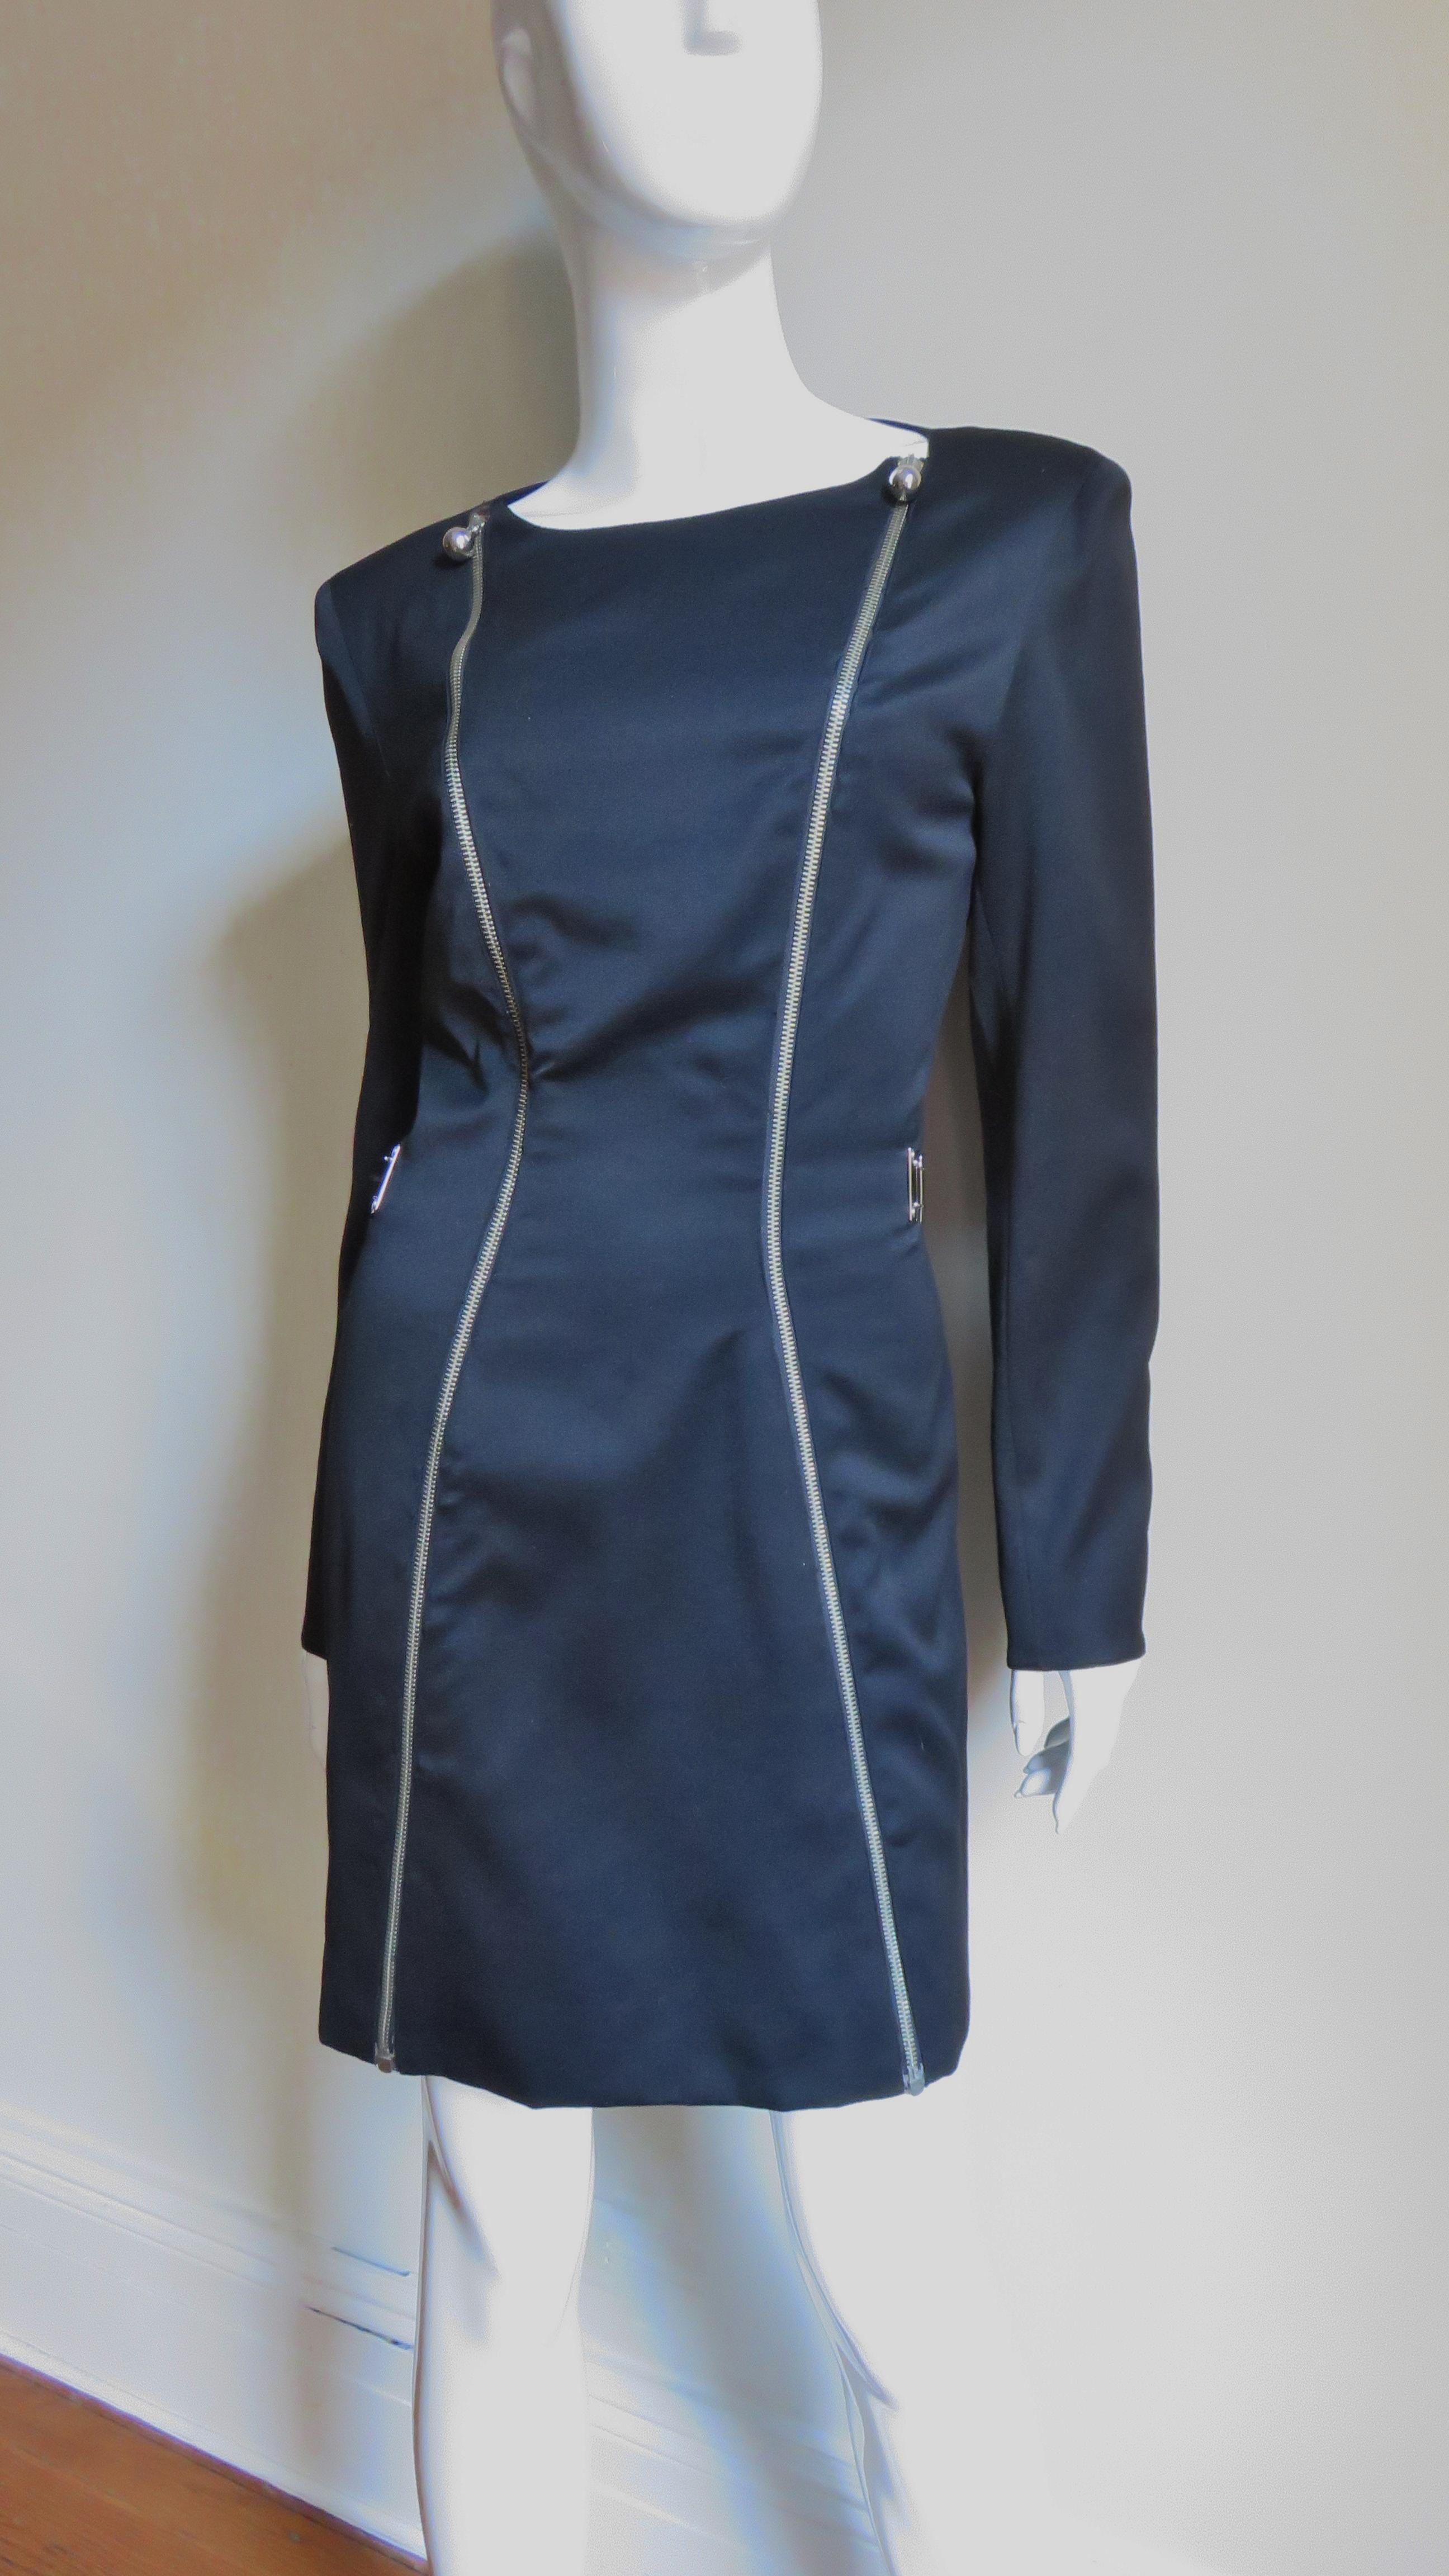 A fabulous black silk wool blend dress from Claude Montana.  It has a space age node with it's double zipper front and cuffs all with silver ball pulls plus a silver rectangular linked articulated half belt in the back.  It has small shoulder pads